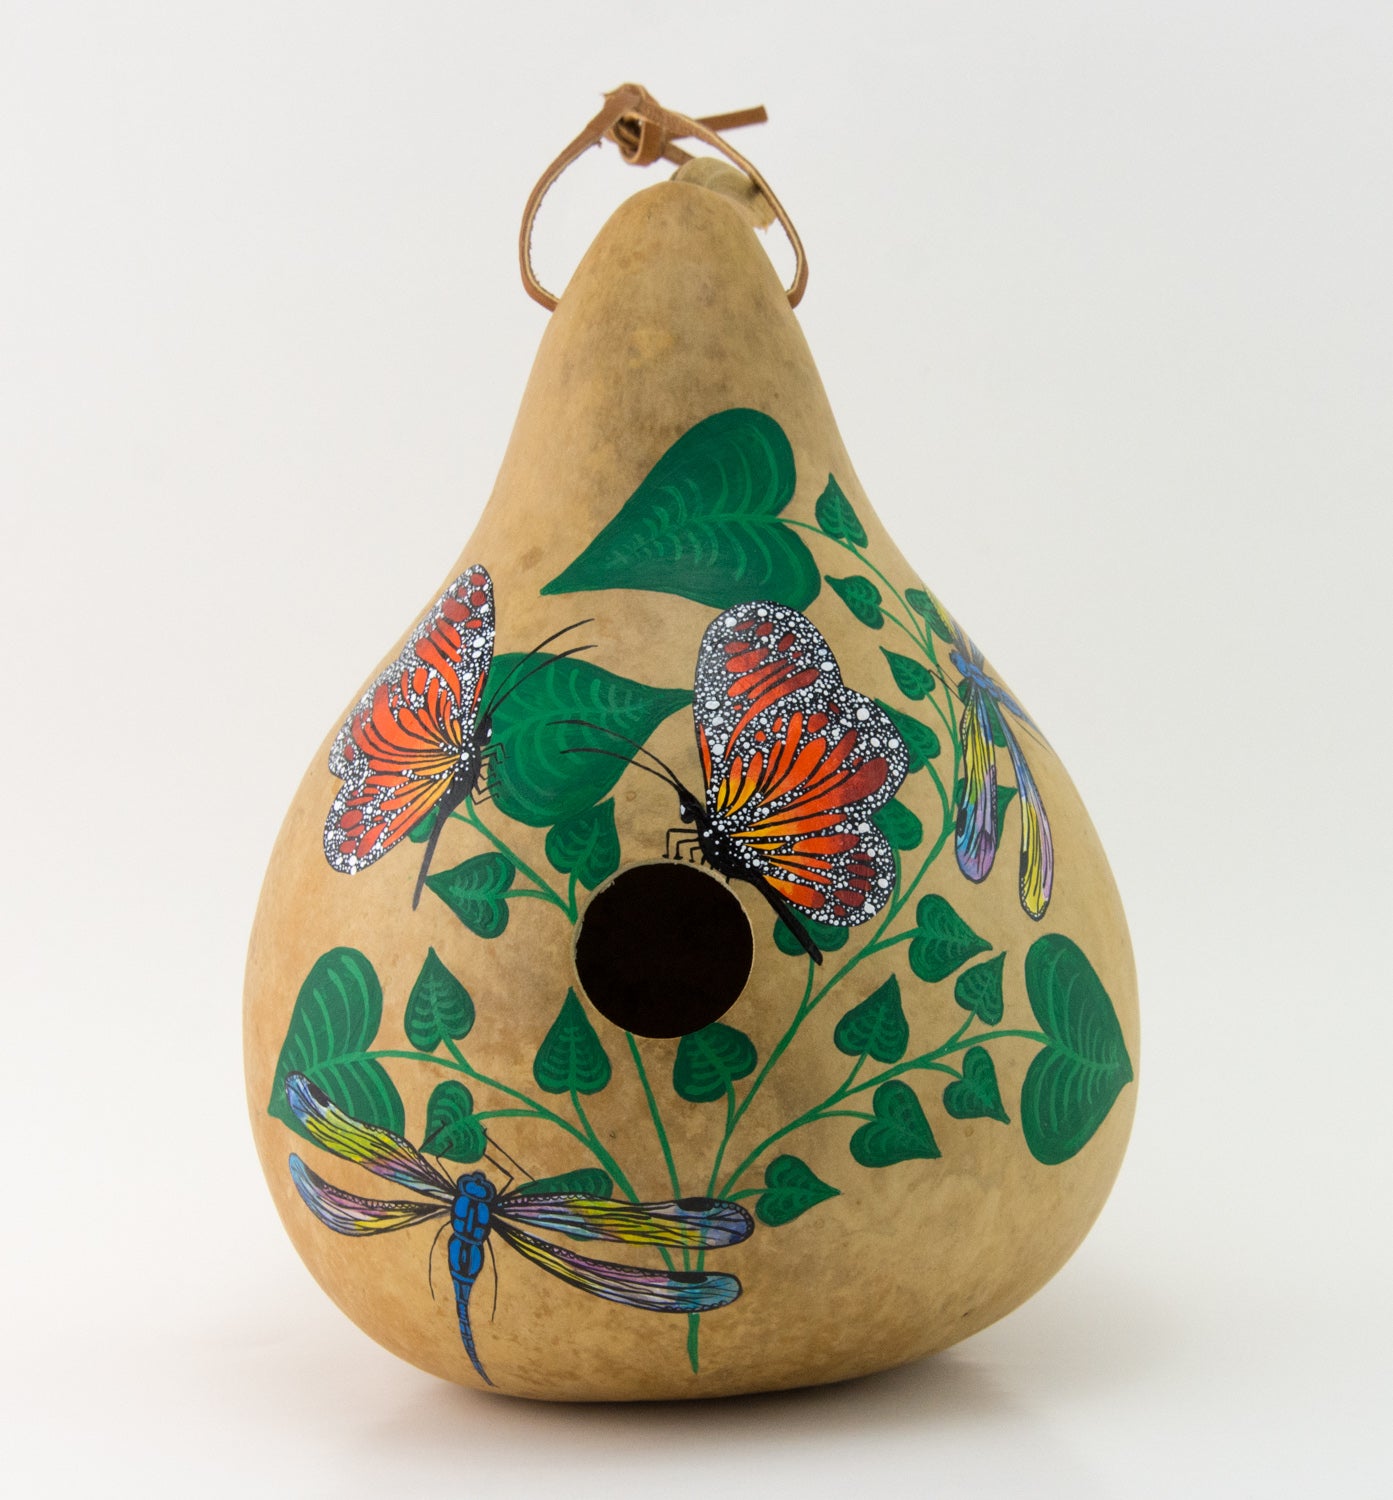 Birdhouse Gourds - Outdoor Ready Birdhouses and Nests - Handmade